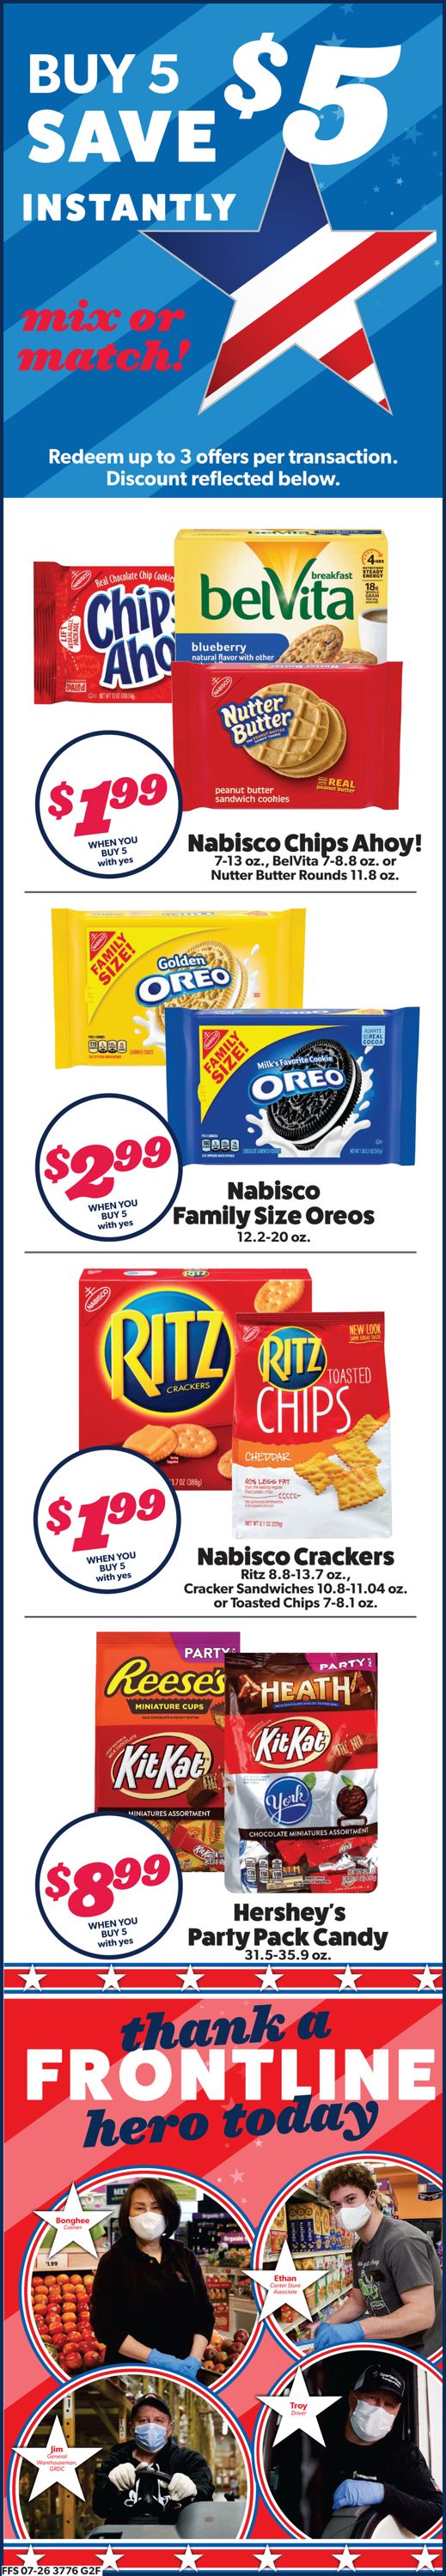 Family Fare Ad from 07/29/2020